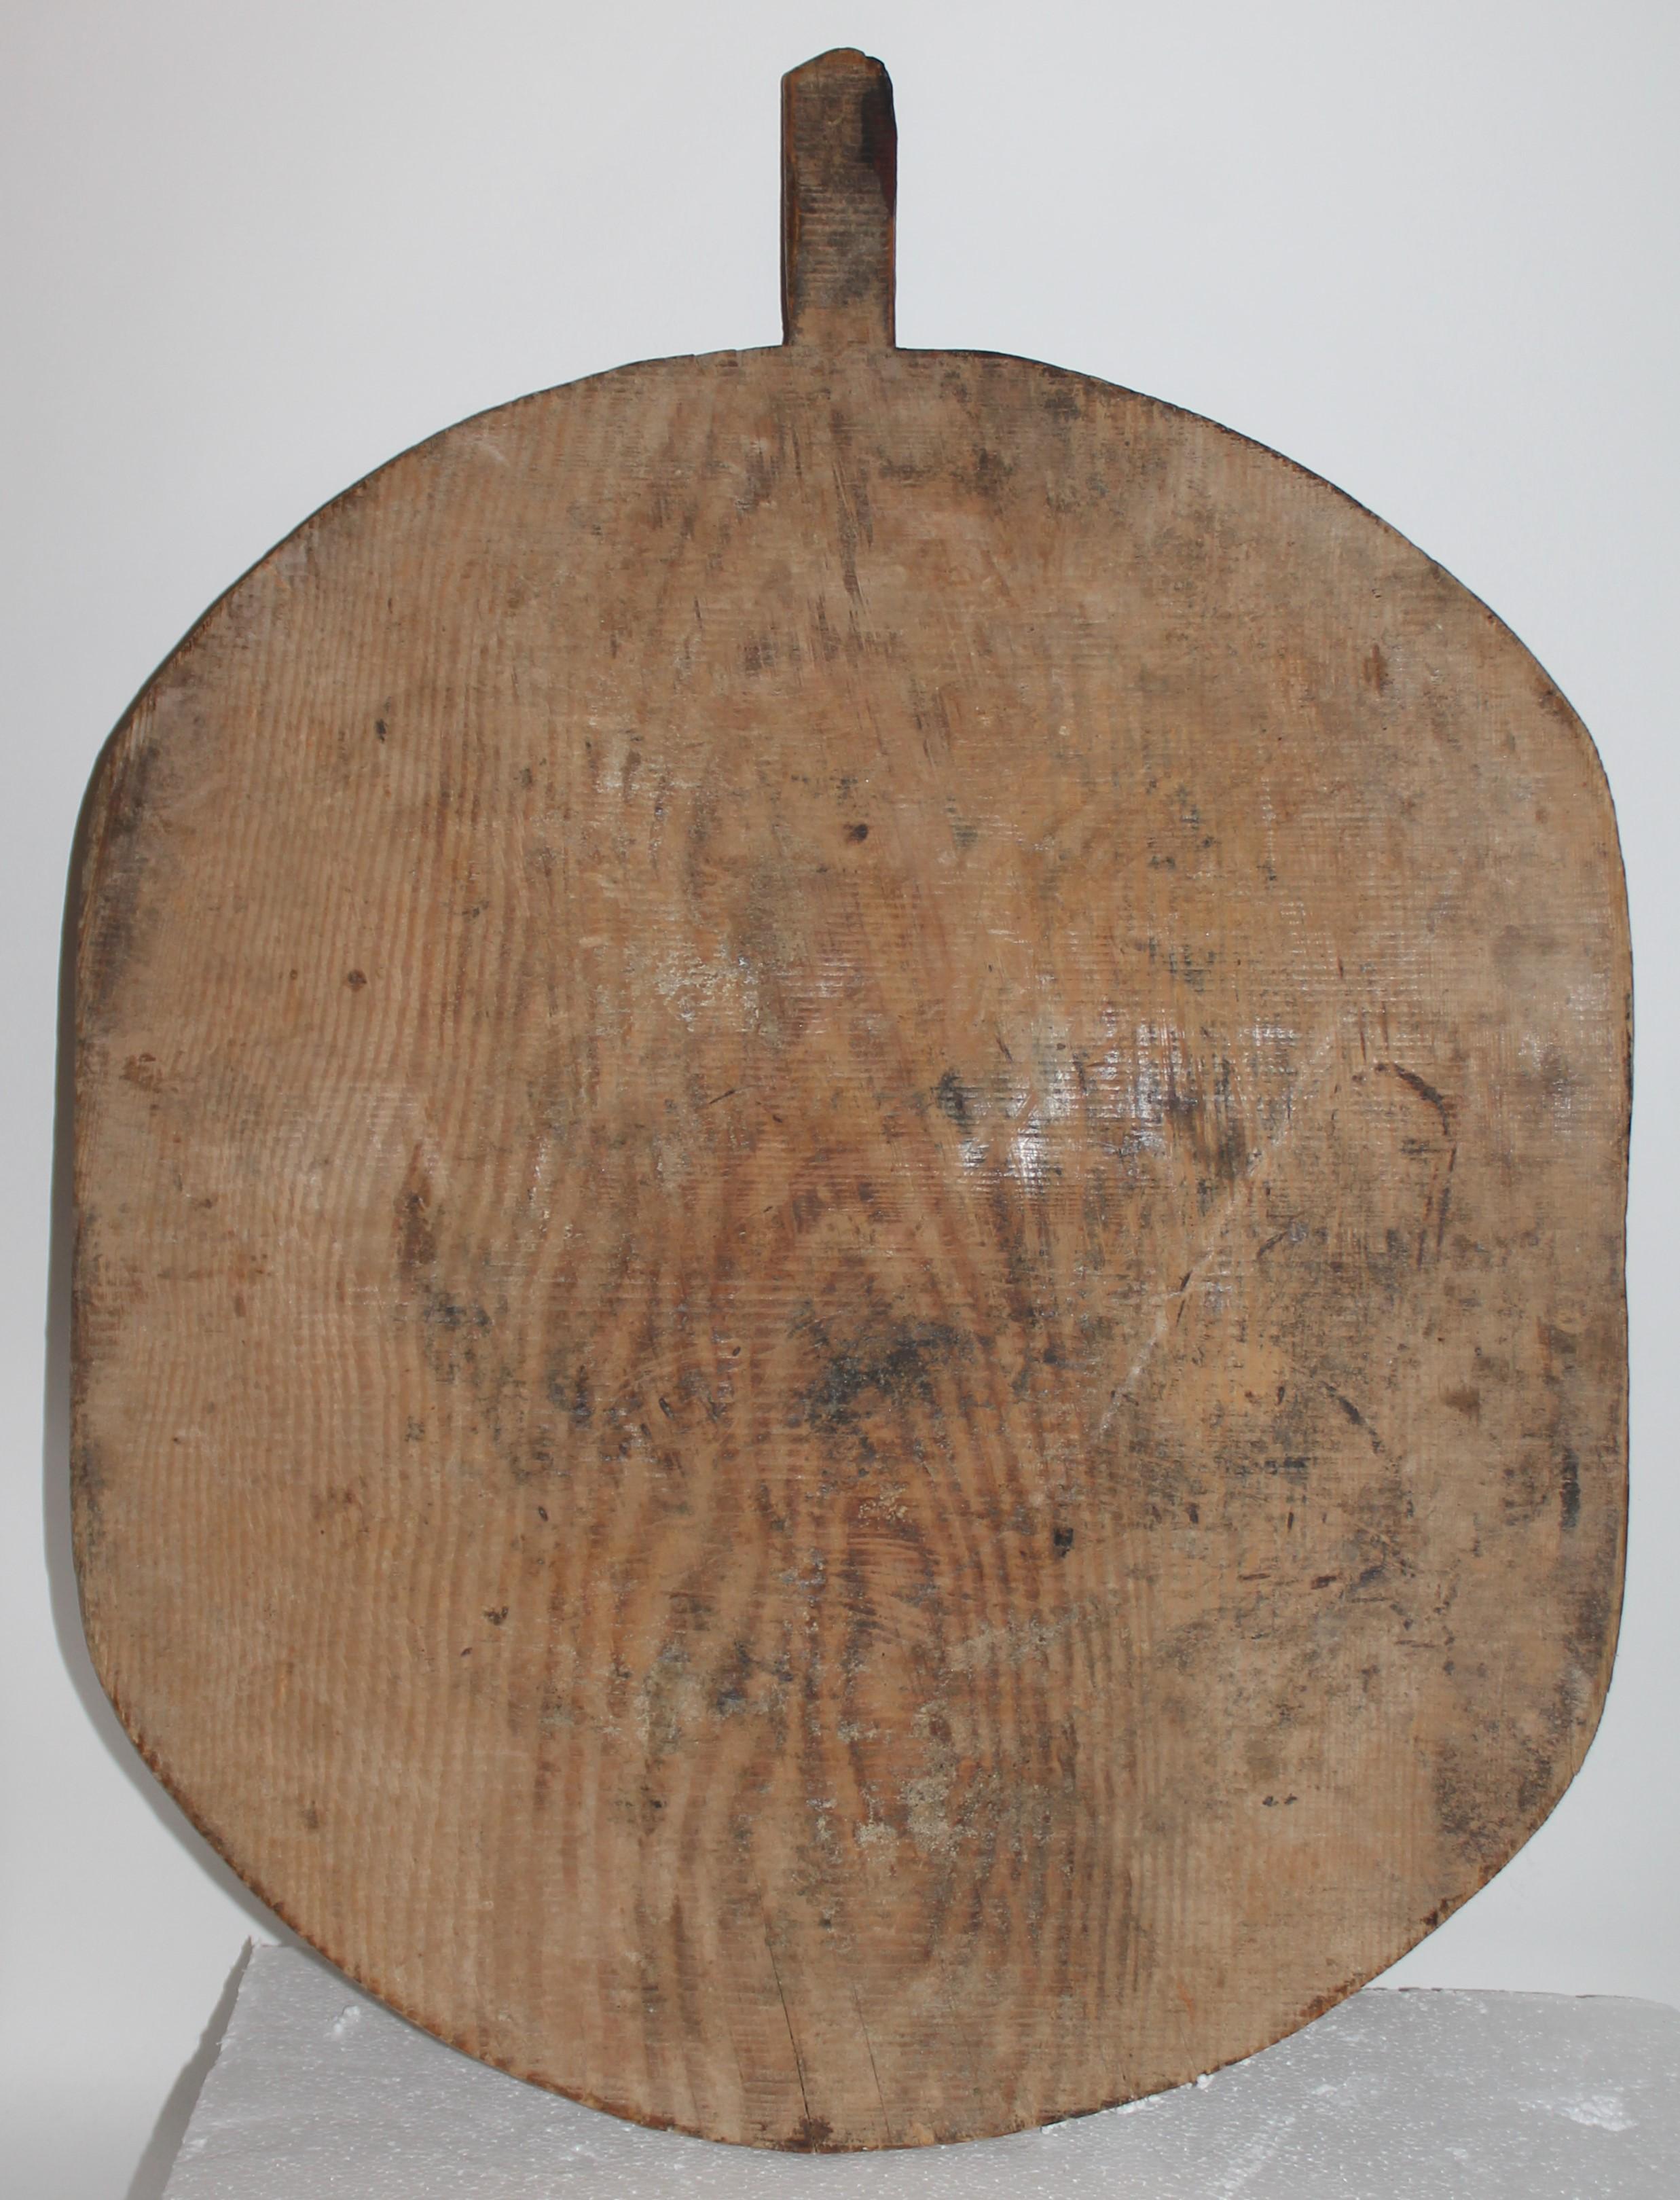 This fine early cutting board is in great condition with a fantastic patina. It was found in New England. Great hung on a wall or use as a serving cutting board.